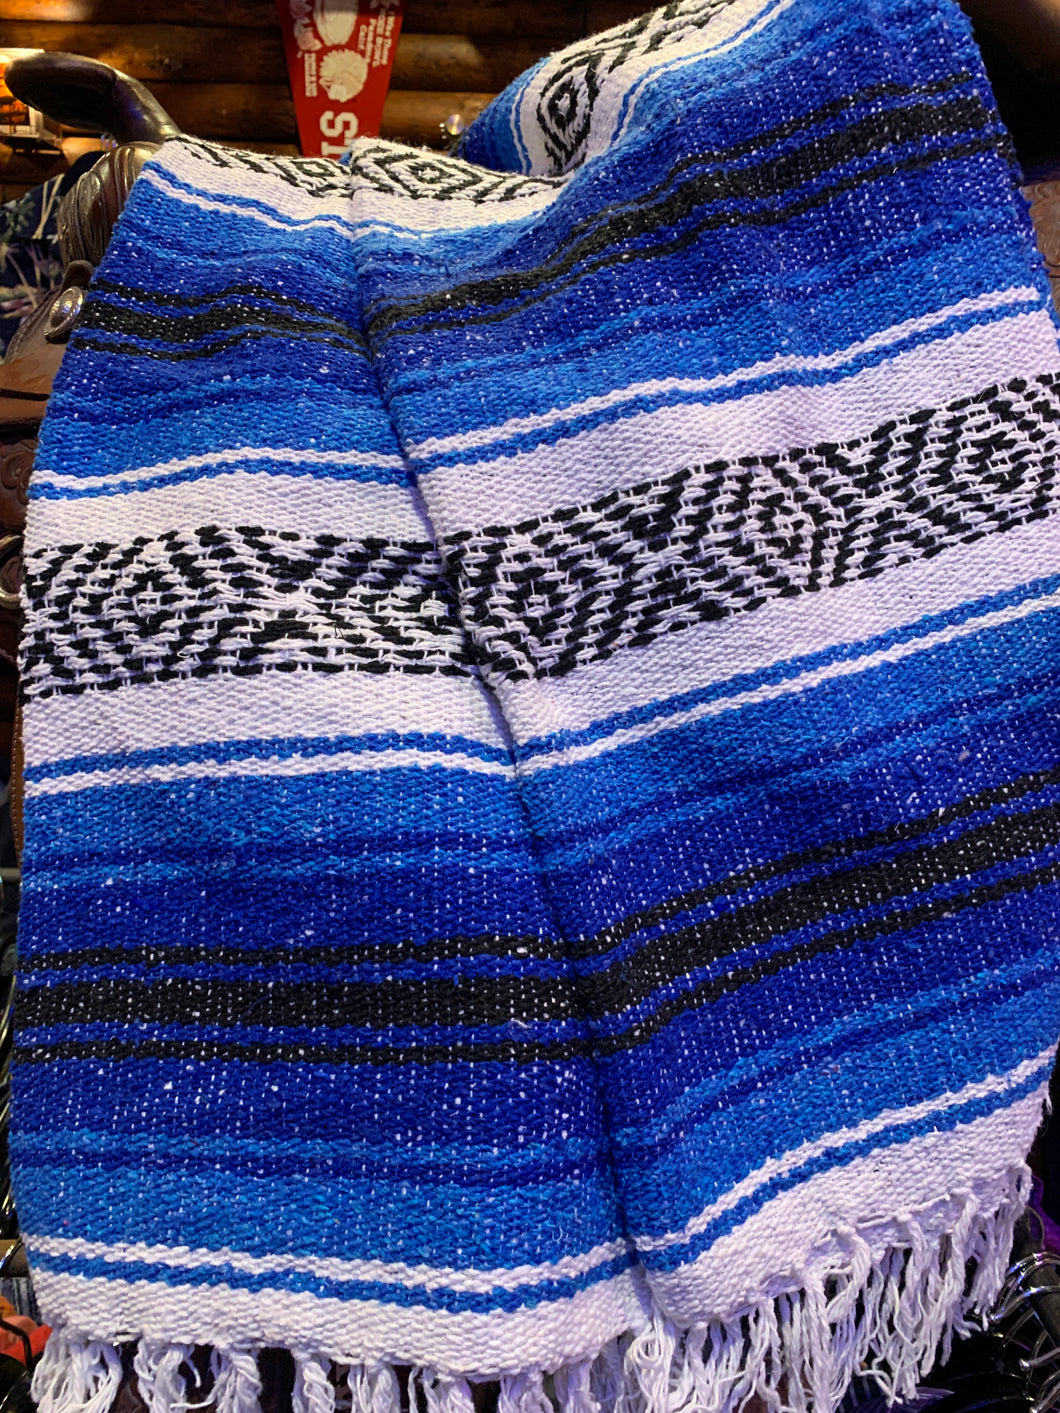 Extra Large. Authentic Mexican Blanket. Imported from Mexico. Cobalt Blue